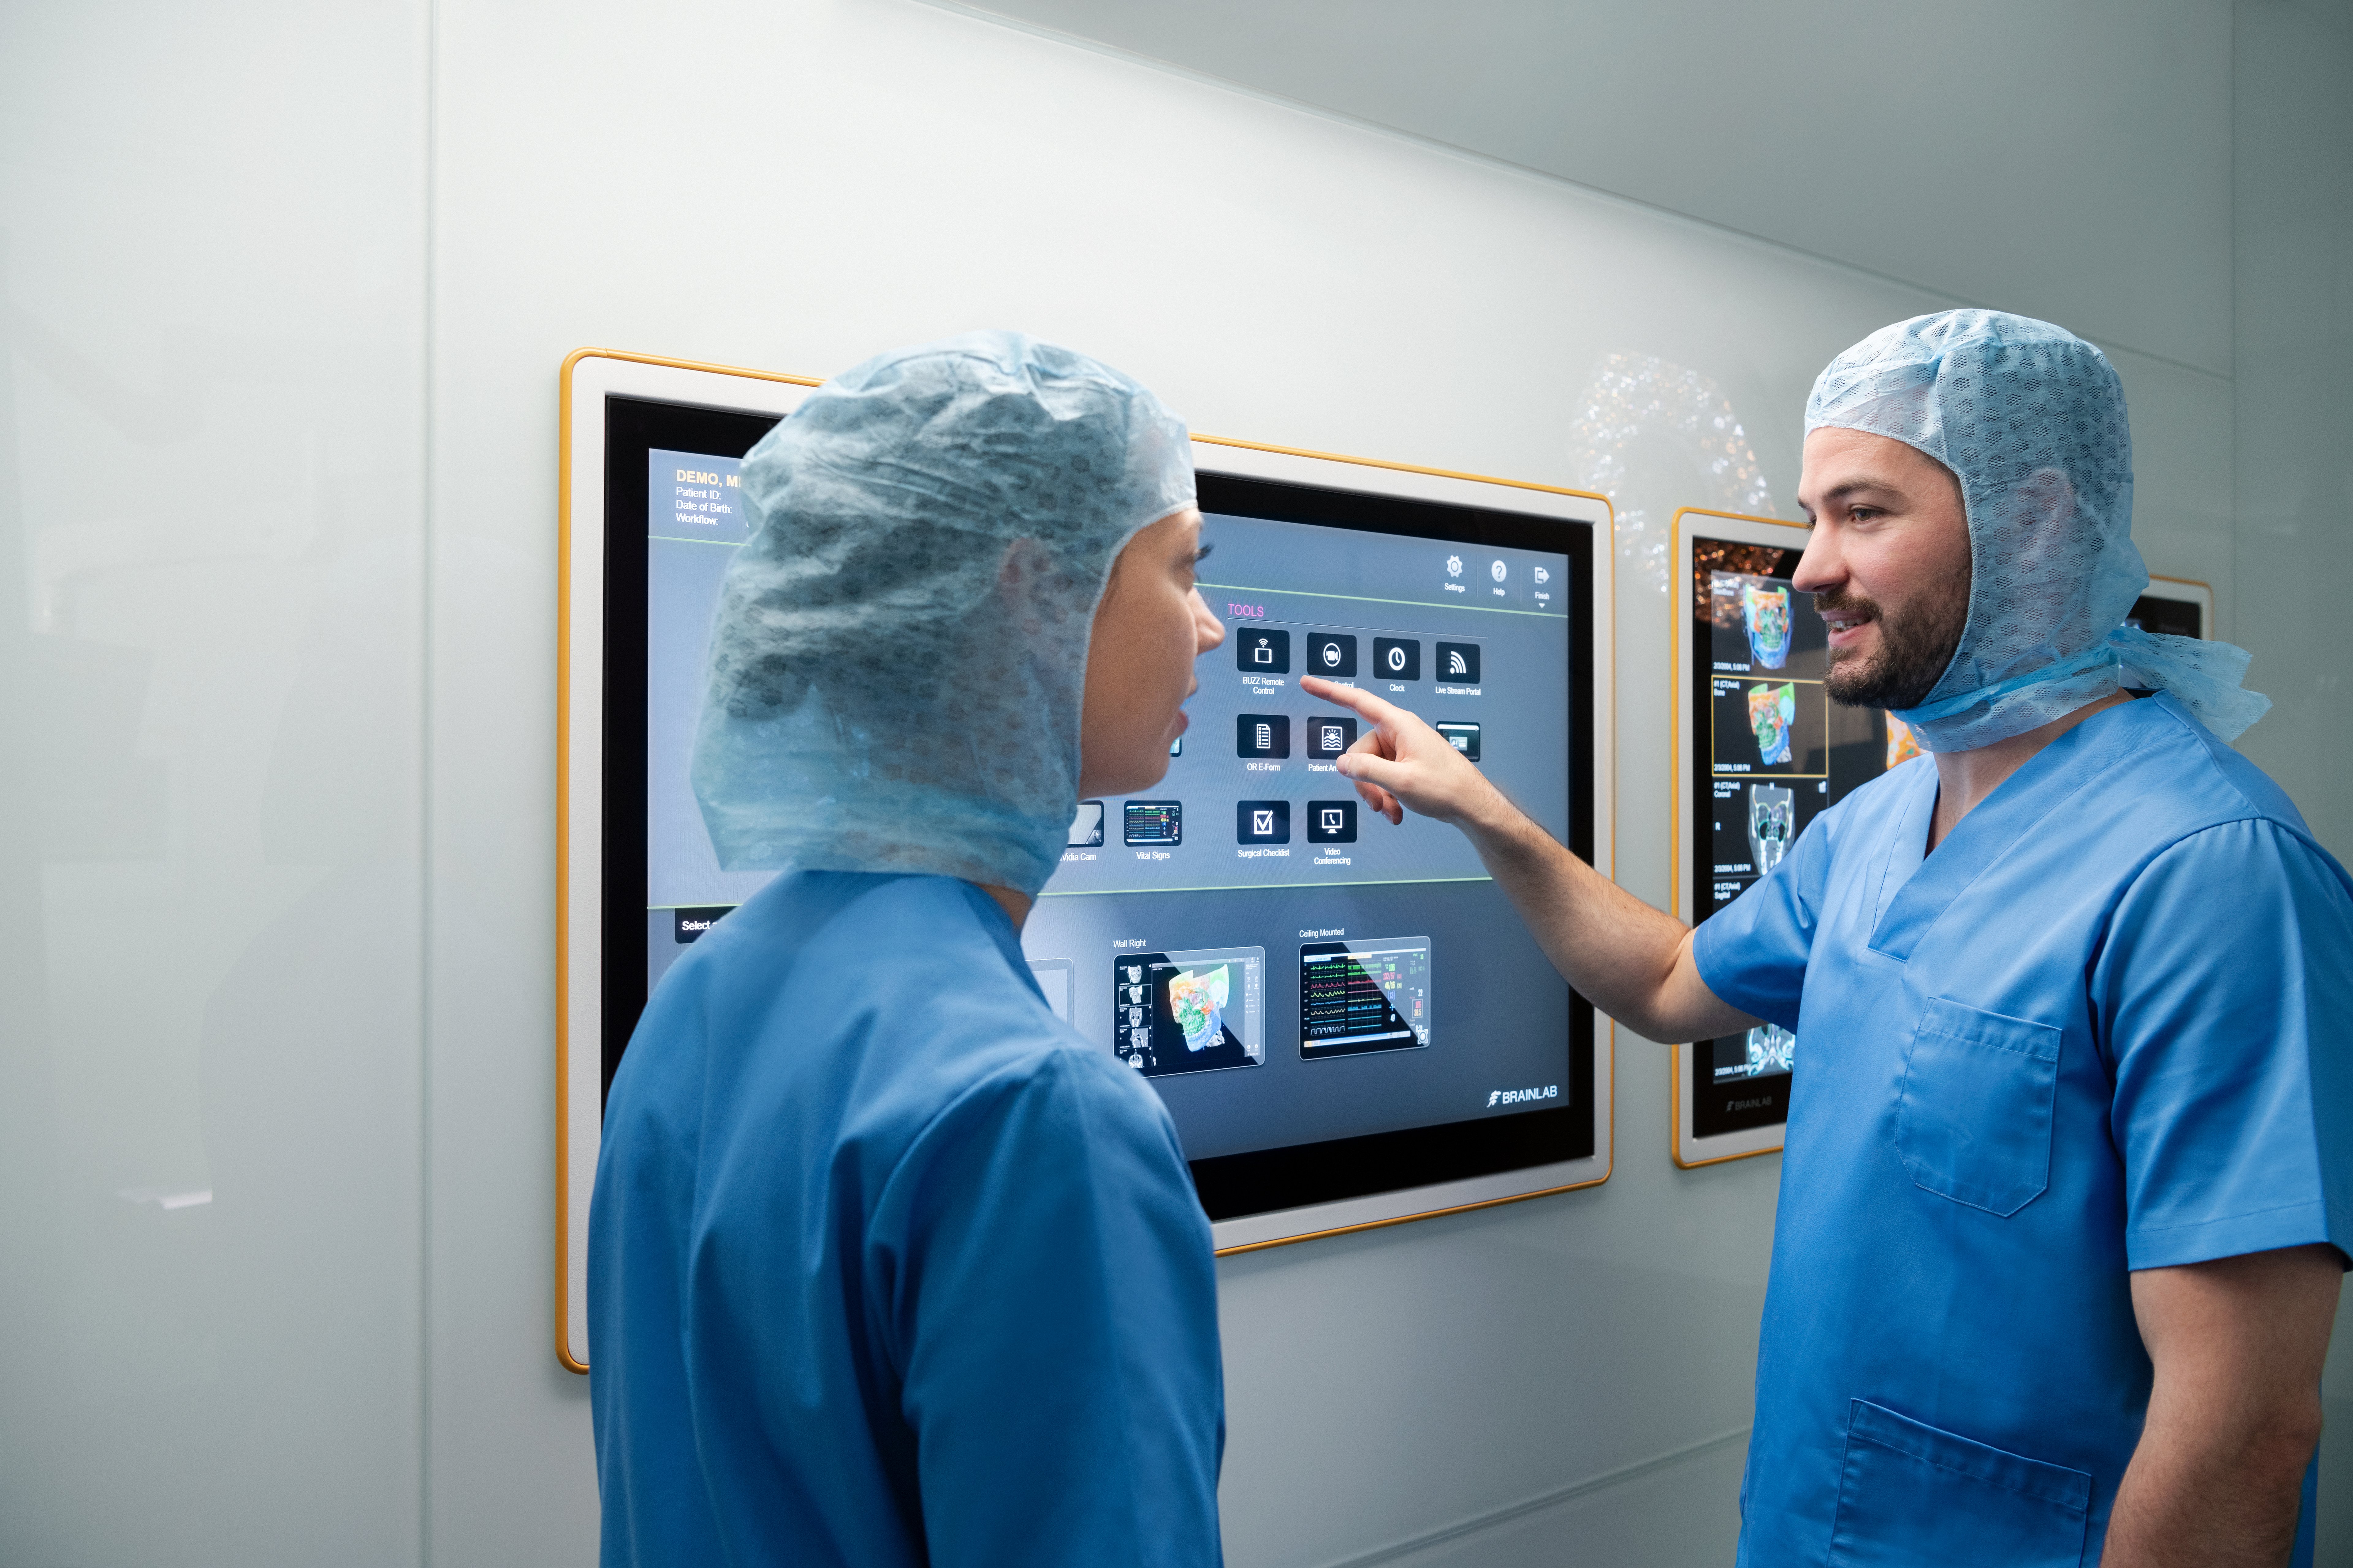 2 clinicians are shown utilizing Buzz in the operating room